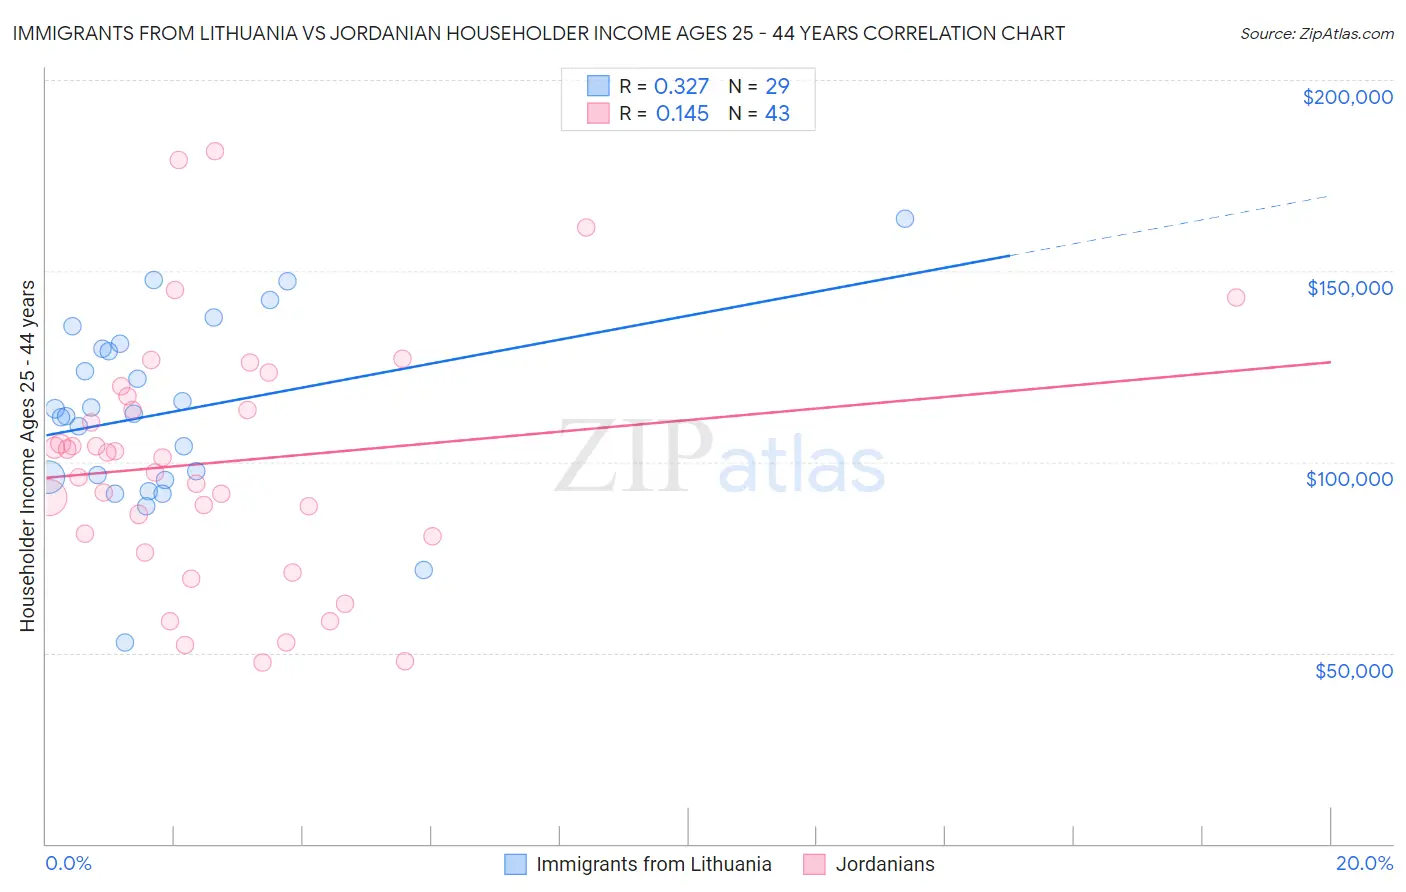 Immigrants from Lithuania vs Jordanian Householder Income Ages 25 - 44 years